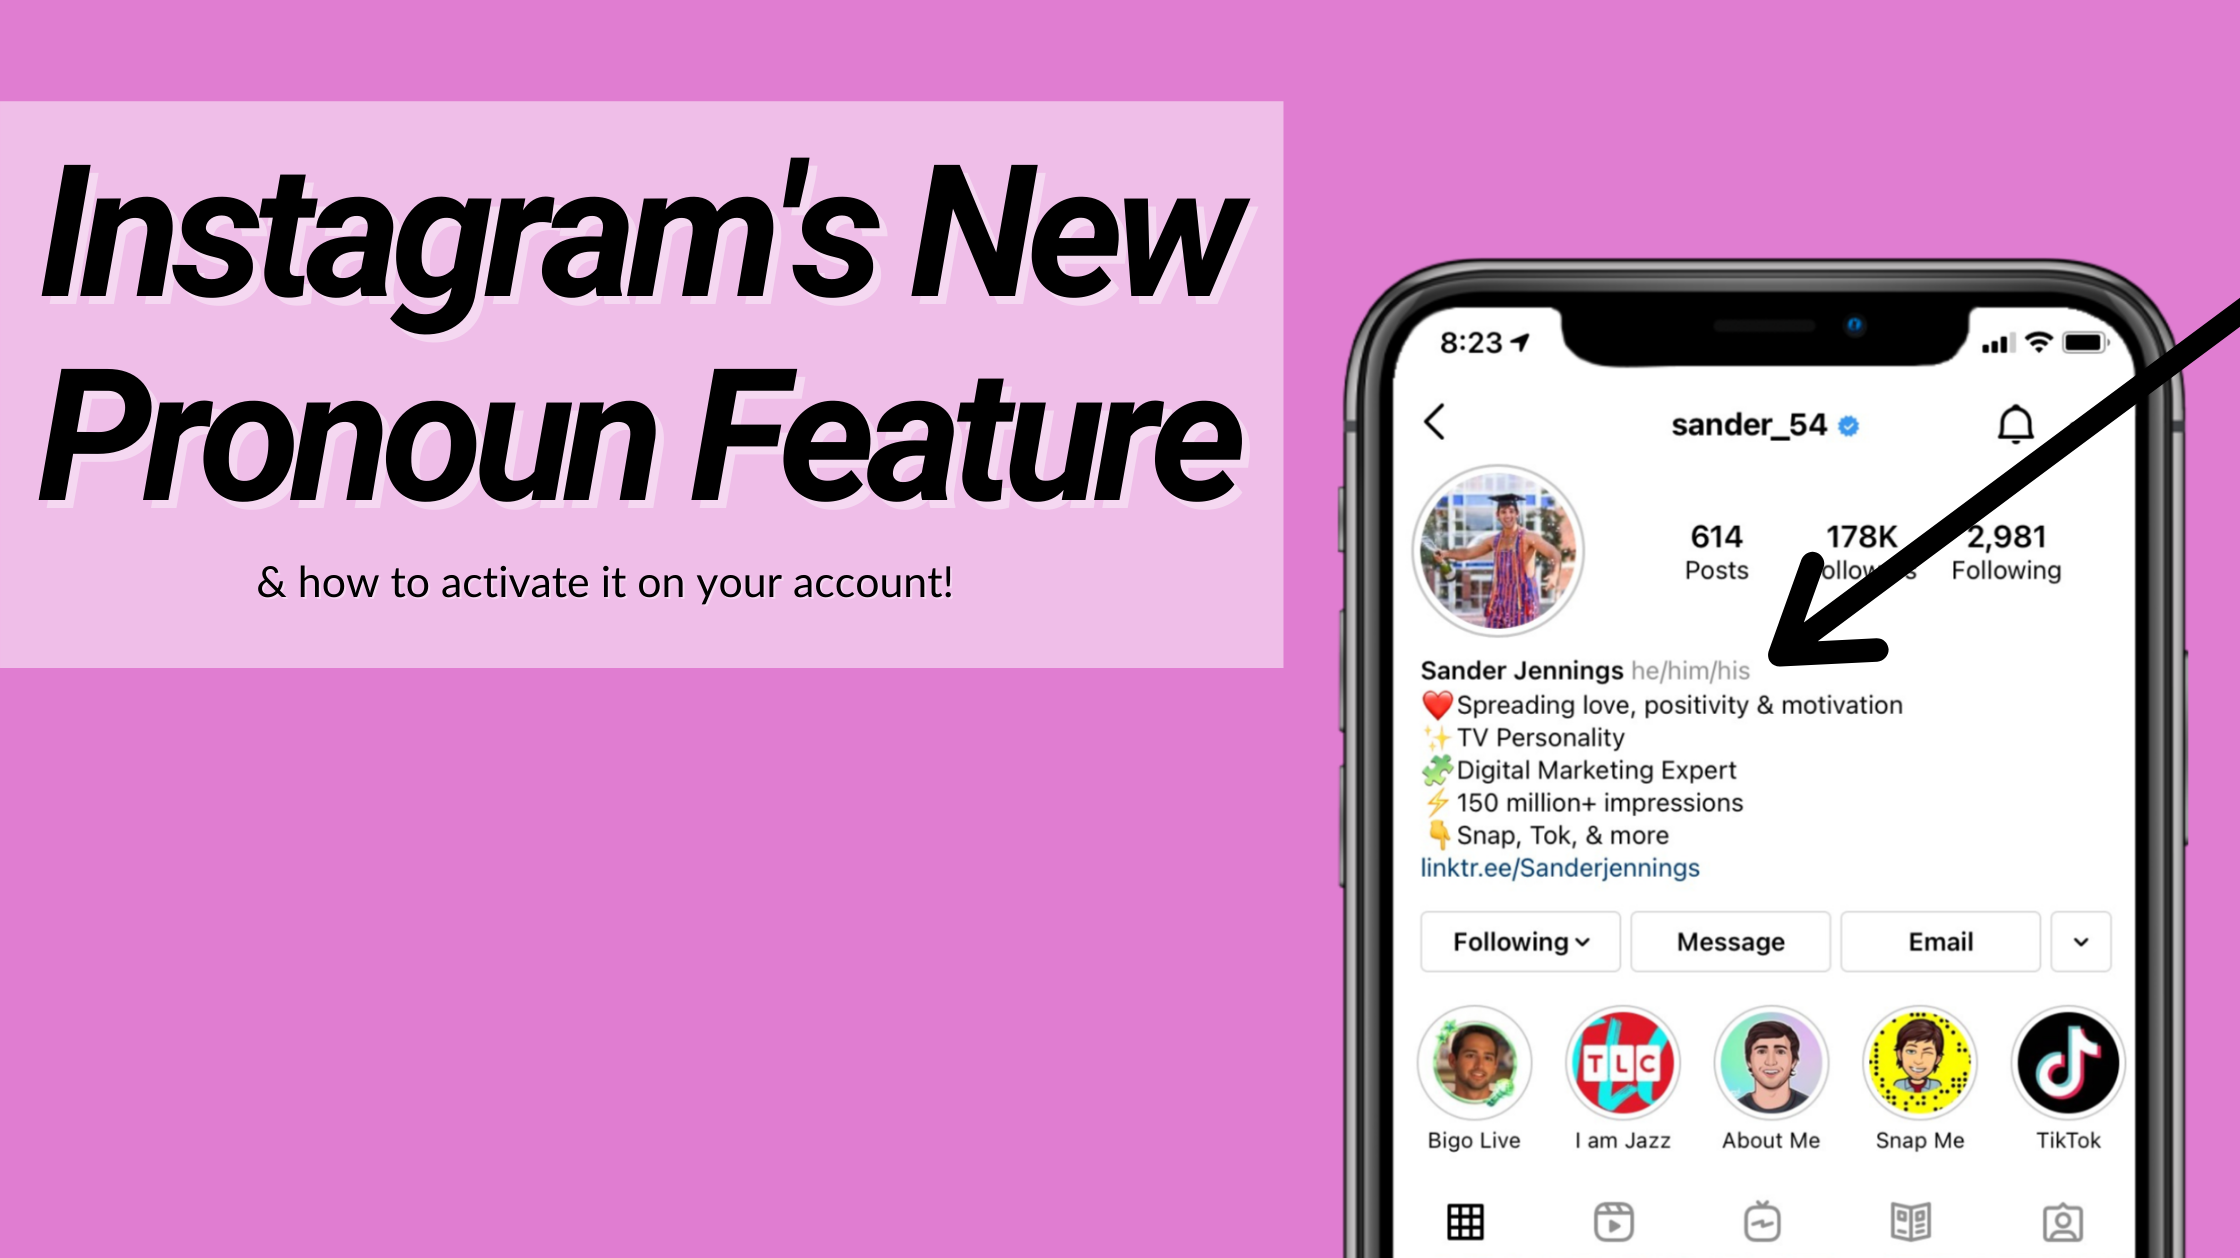 What is Instagram's new Pronoun Feature?